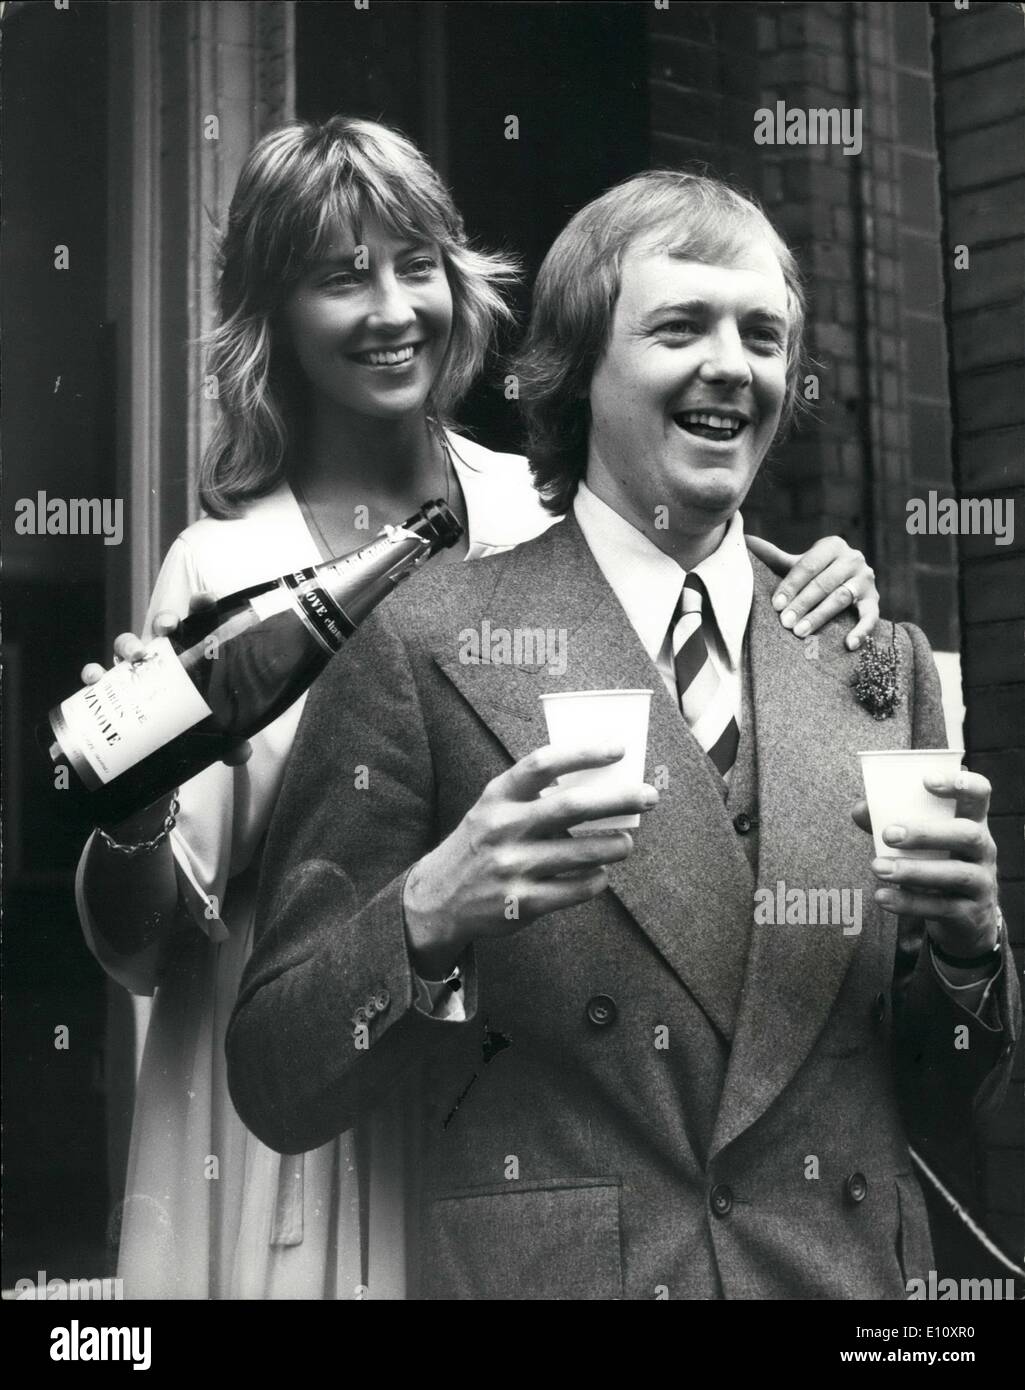 Aug. 08, 1974 - Mr. Superstar marries - Tim Rice, the Wealthy Lyricist of the hit musical ''Jesus Christ Superstar'' was married today to 27-year-old Jame McIntosh, a production assistant with the National Theatre. The Ceremony took place at Kensington Register Office. Stock Photo